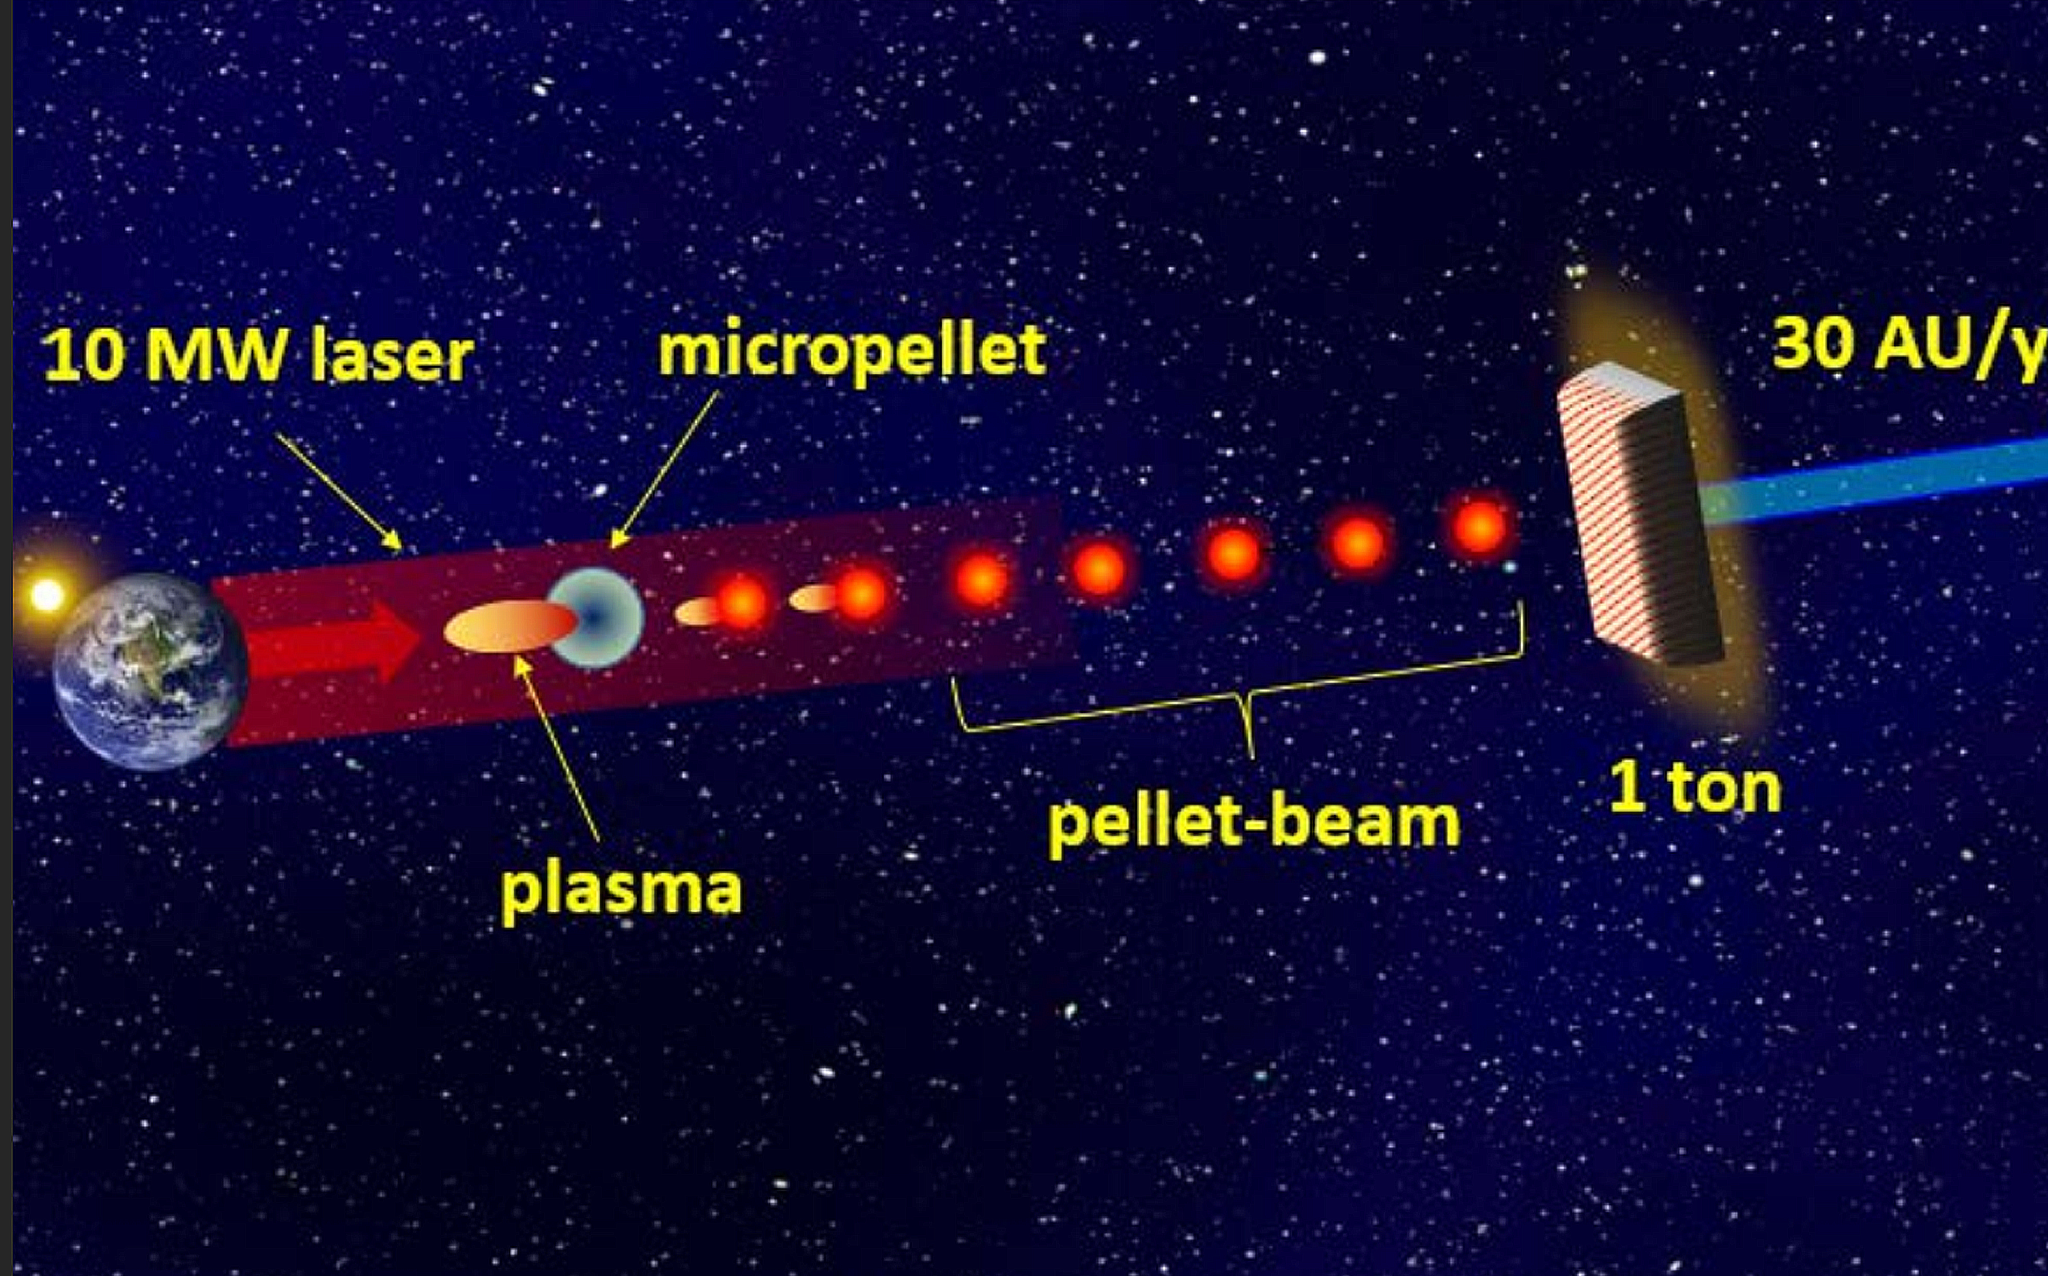 Artist rendition of bellet beams coming from Earth in space.